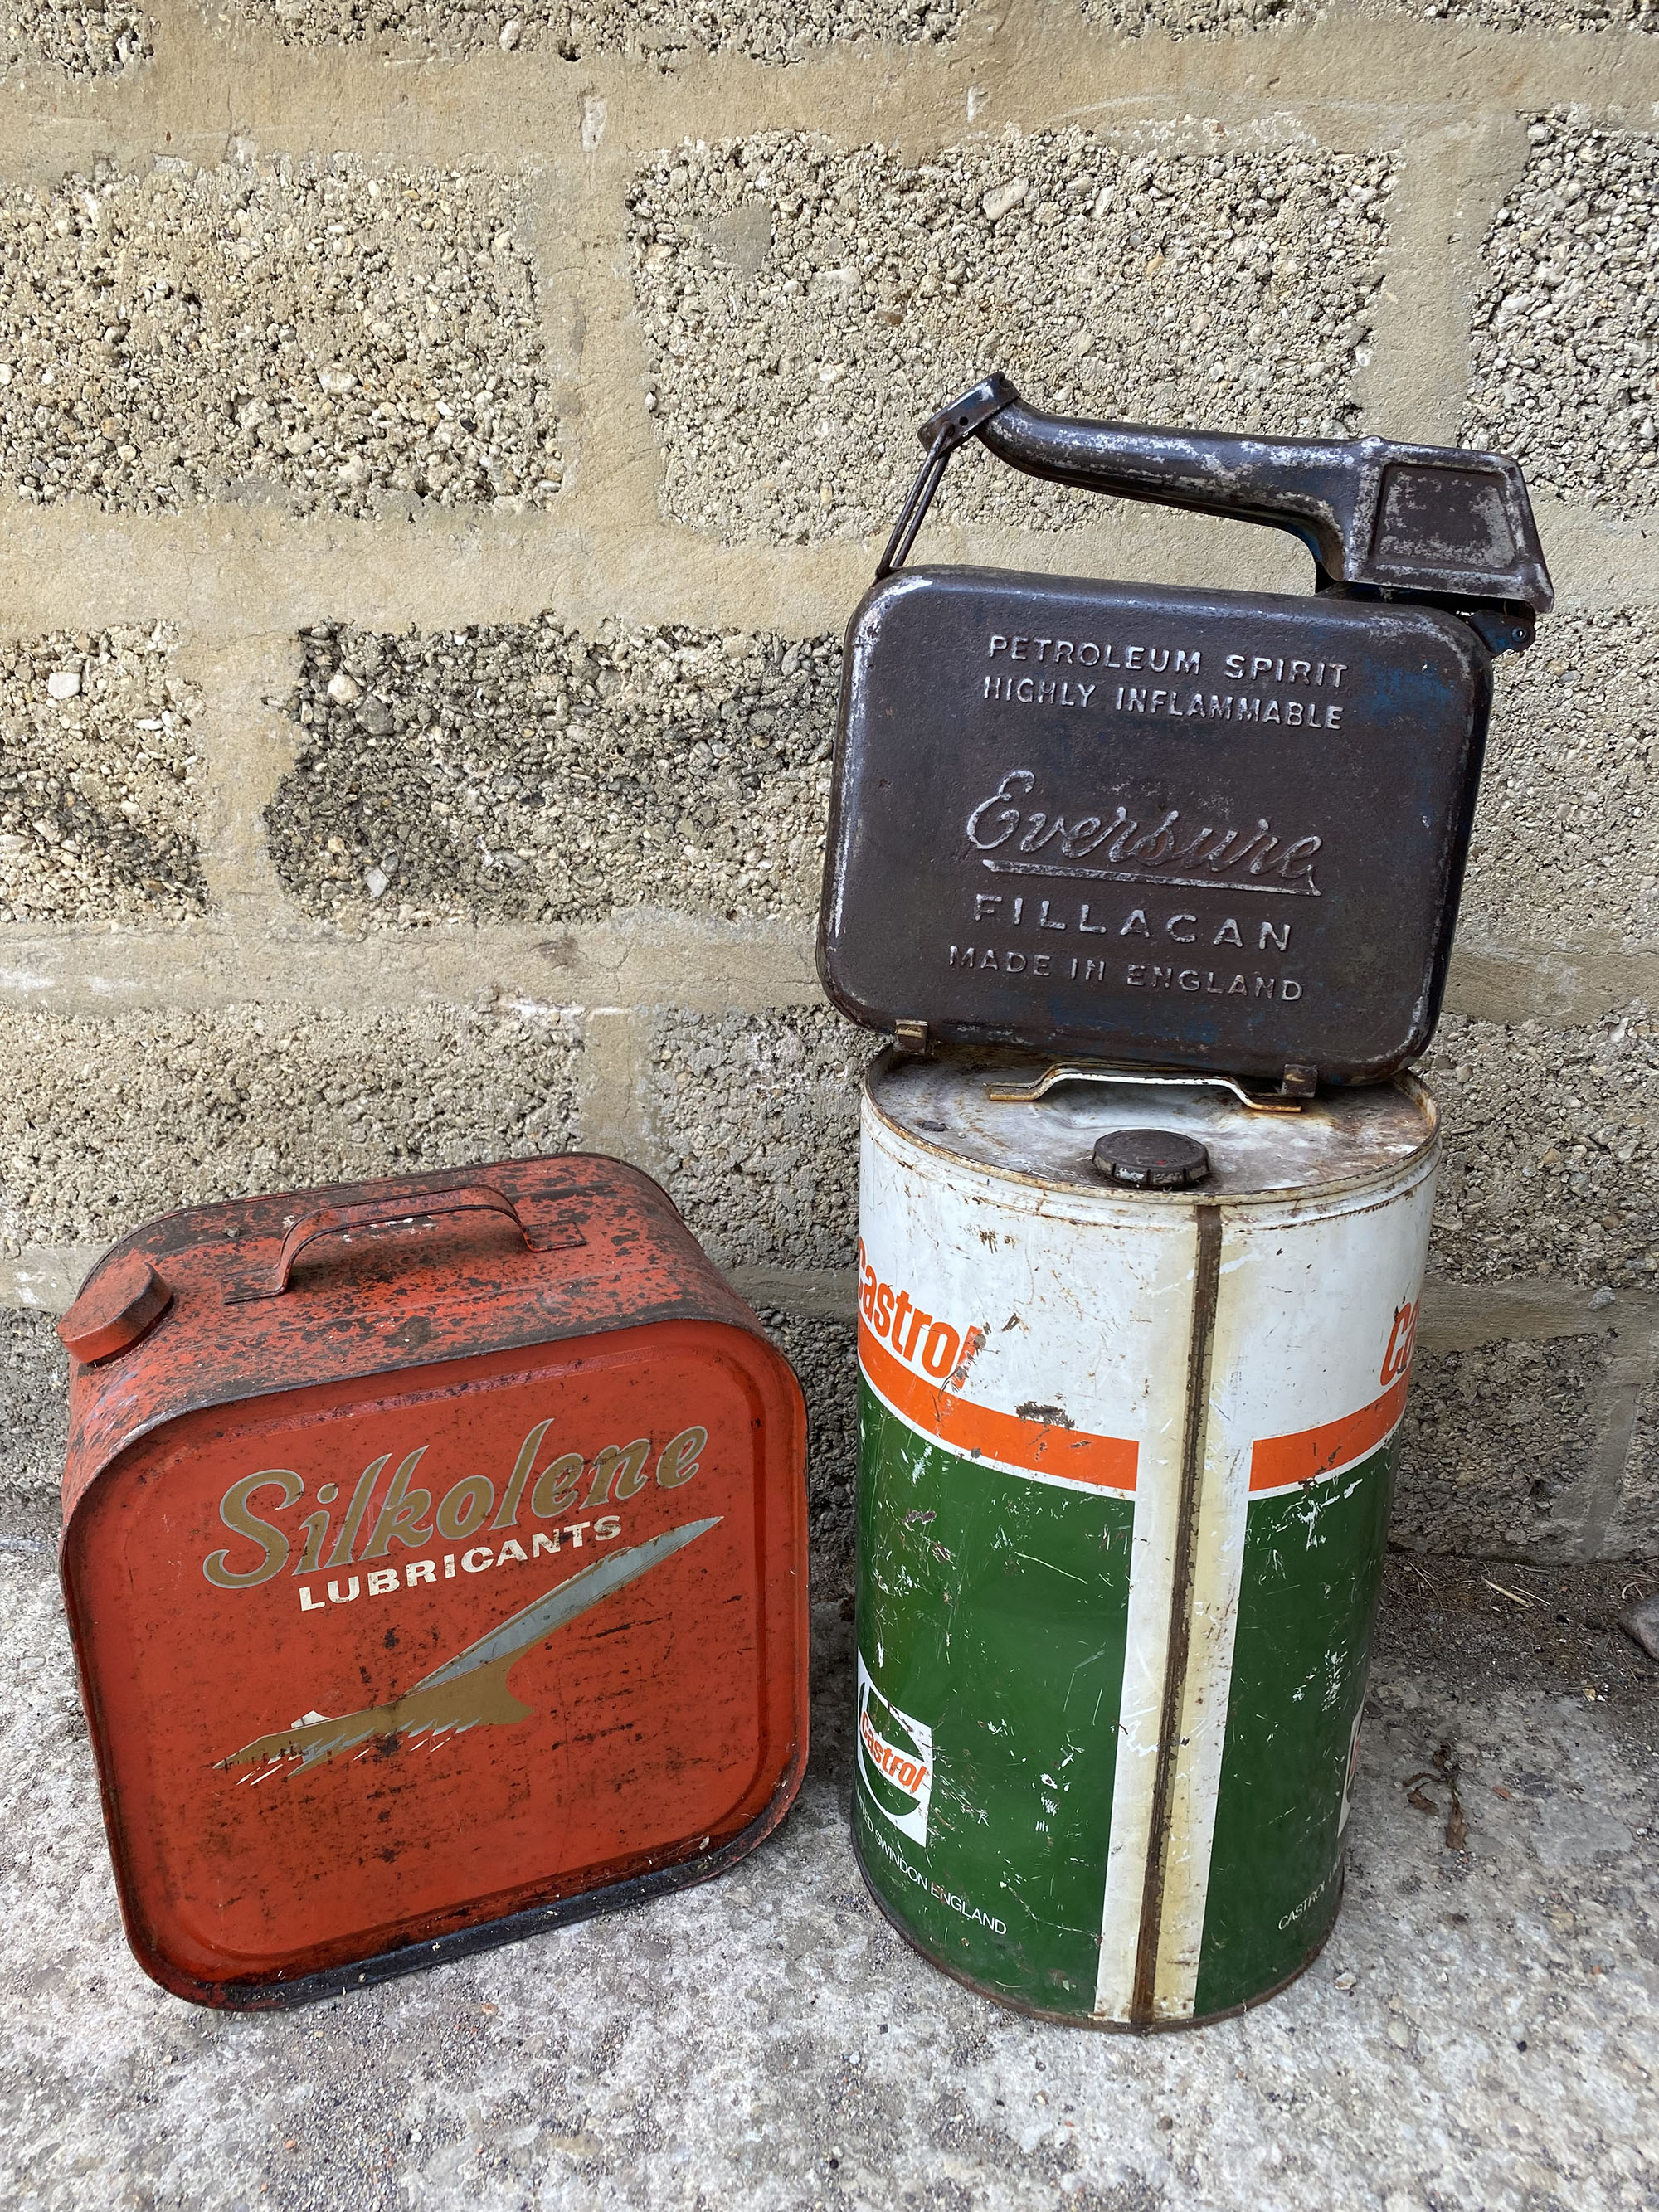 A Silkolene Lubricants five gallon can, a Castrol drum and an Eversure fuel can. - Image 2 of 2